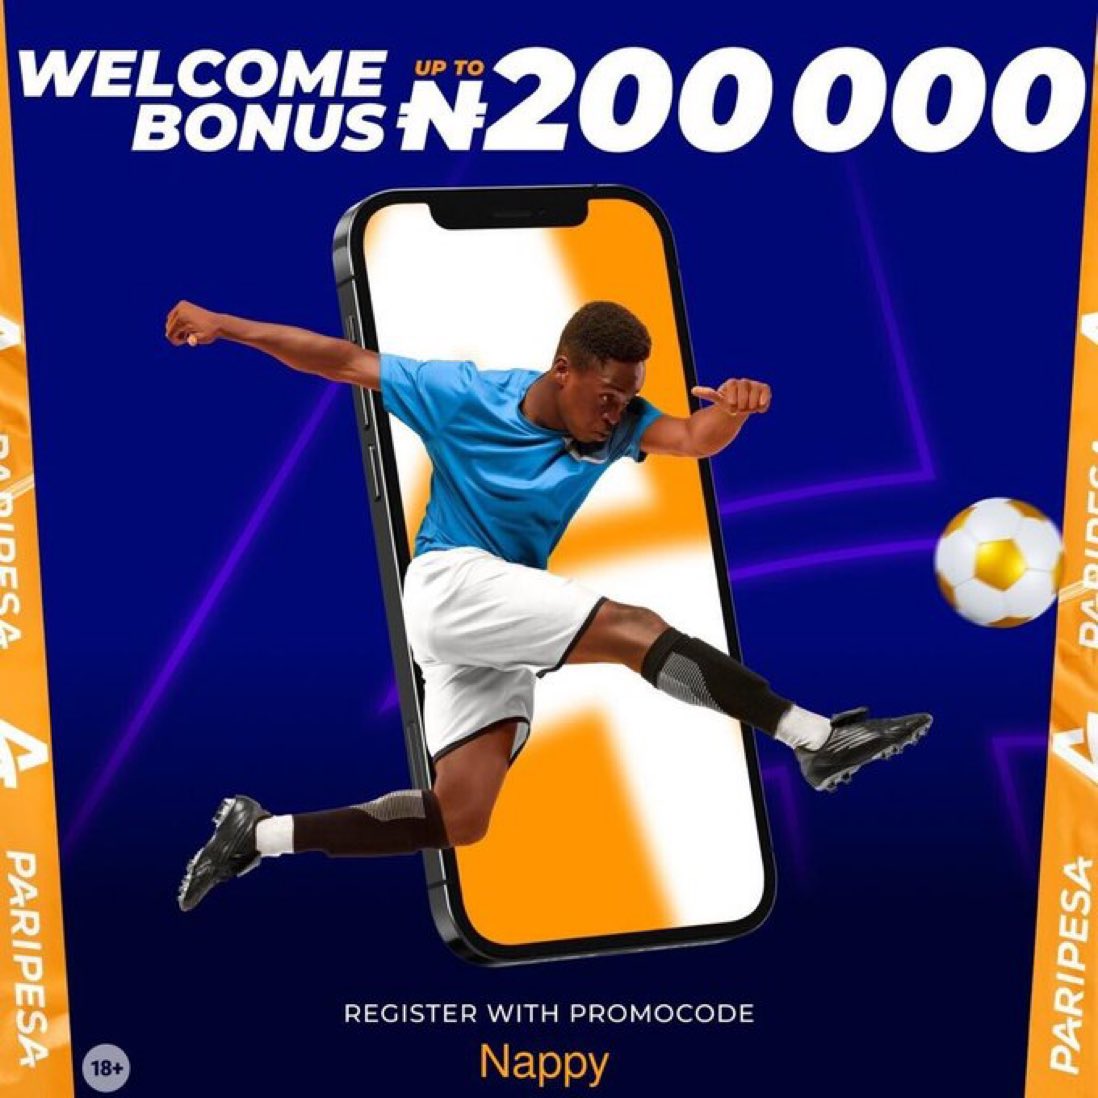 Get 200k registration bonus when you sign up on Paripesa to bet. Dont miss out Register here cutt.ly/lw5eN6JJ to get yours